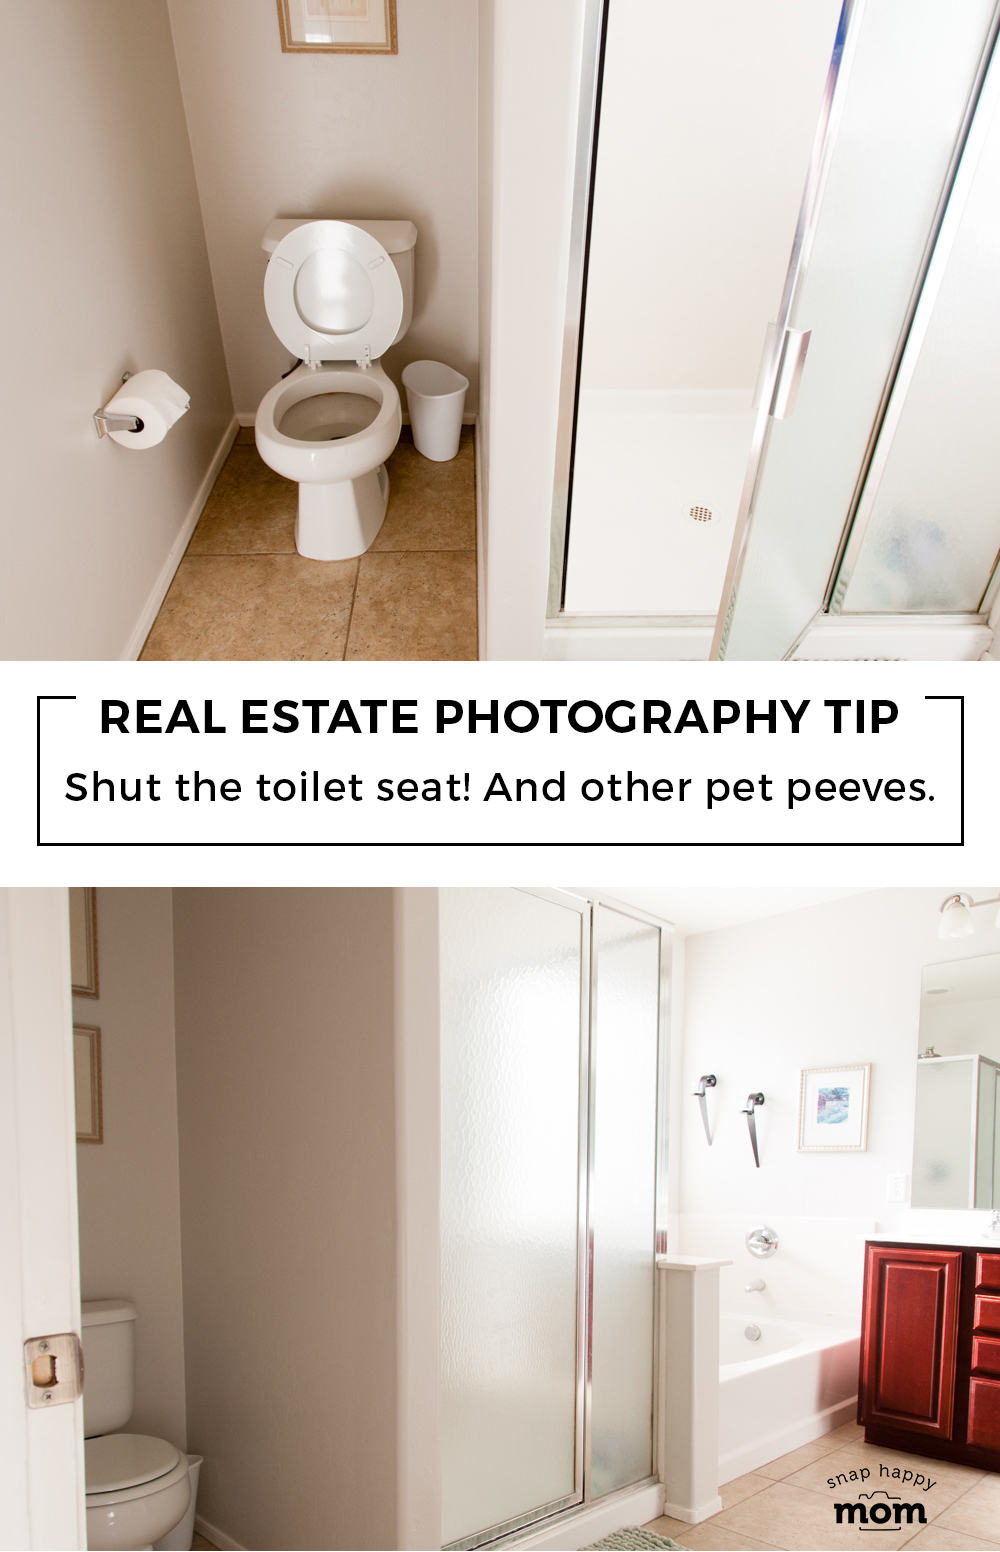 Real Estate Photography: Shut the toilet seat. And other pet peeves that turn your buyer off.